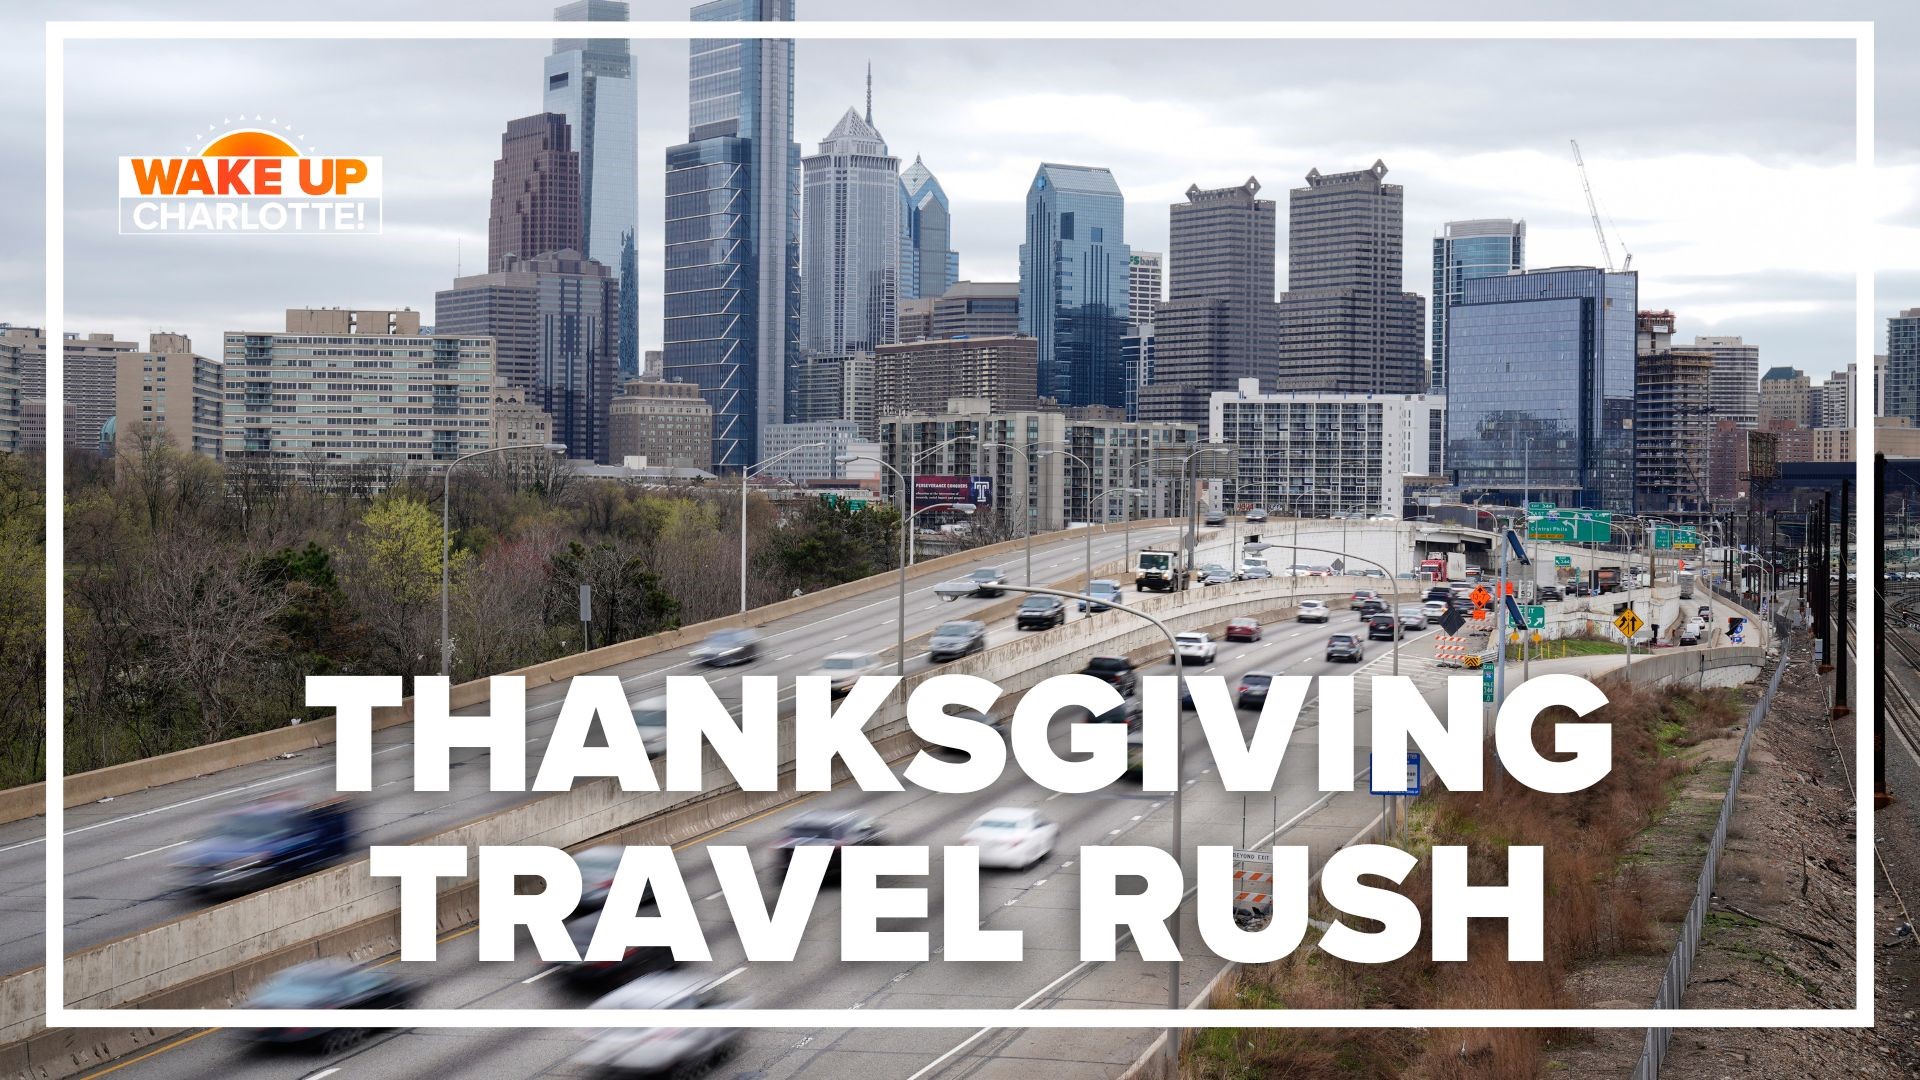 AAA predicts 55 million Americans will travel more than 50 miles for Thanksgiving, making 2022 one of the busiest years ever for holiday travelers.